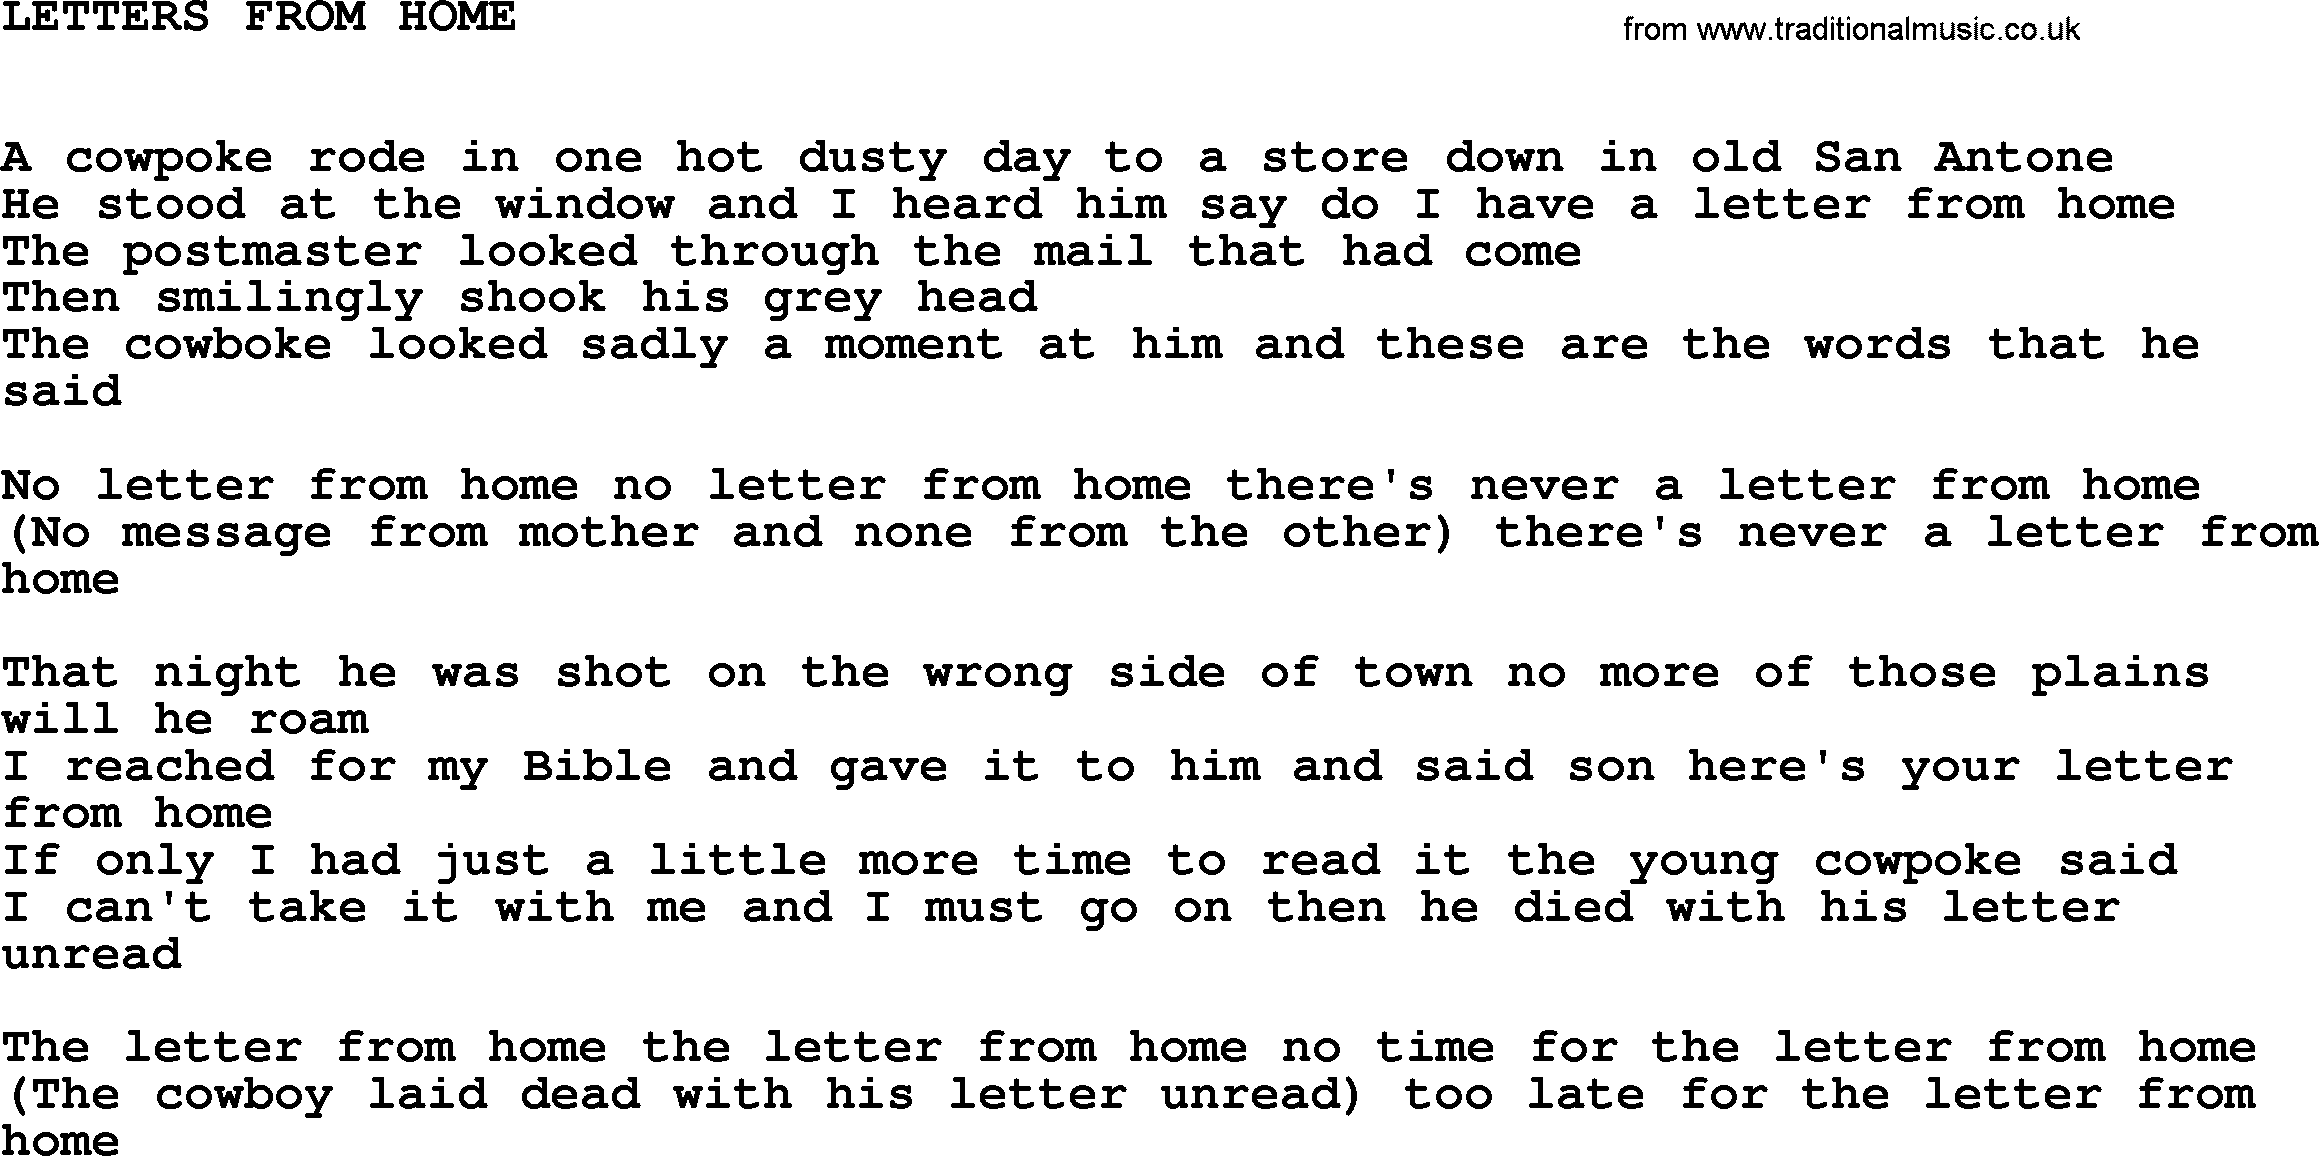 Johnny Cash song Letters From Home.txt lyrics